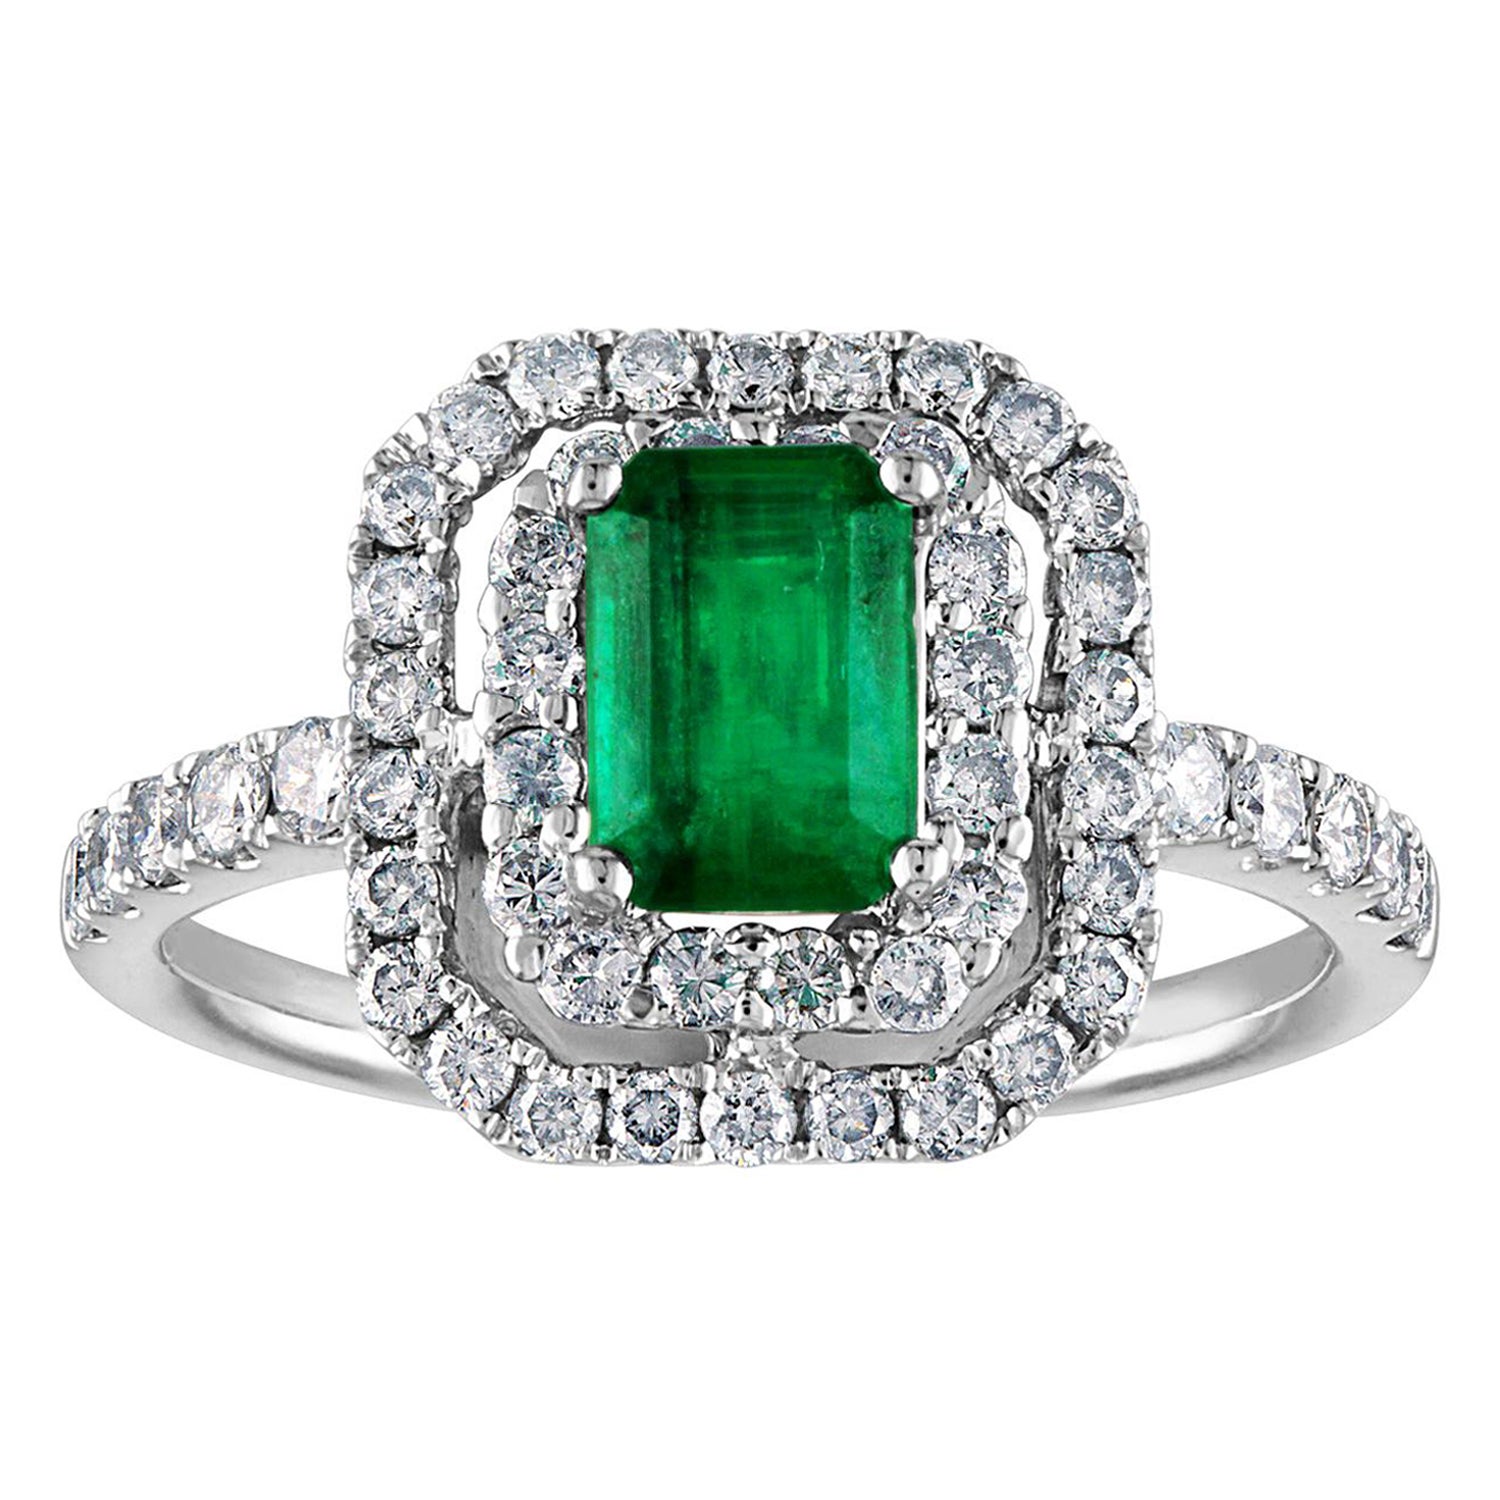 AGL Certified 0.80 Carat Emerald Diamond Gold Ring For Sale